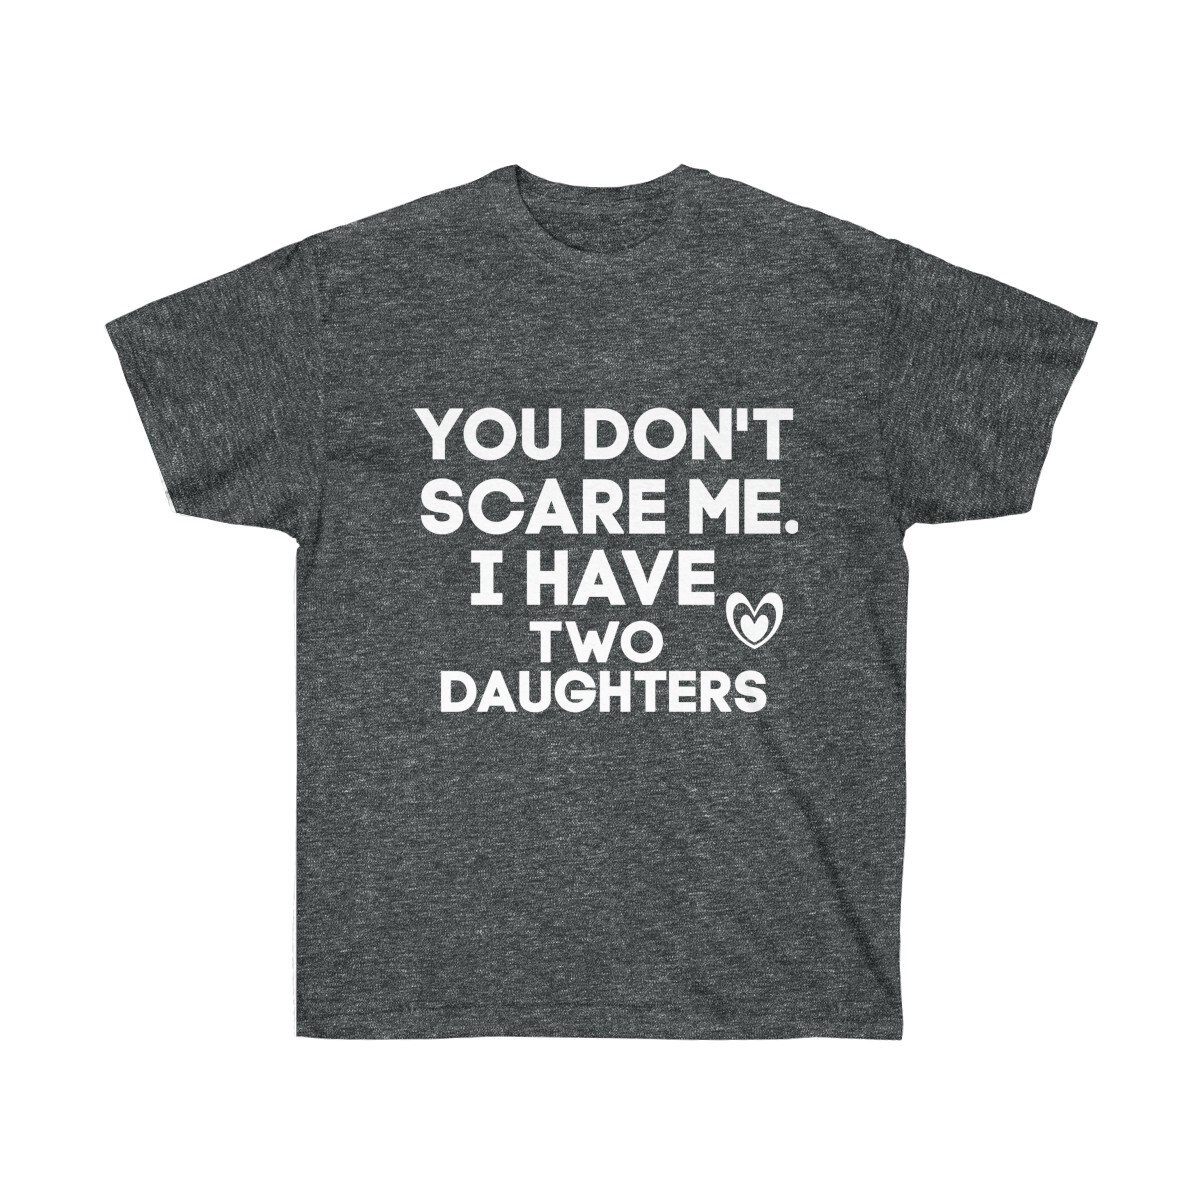 You don't scare me I have Two daughters tshirt dad | Etsy